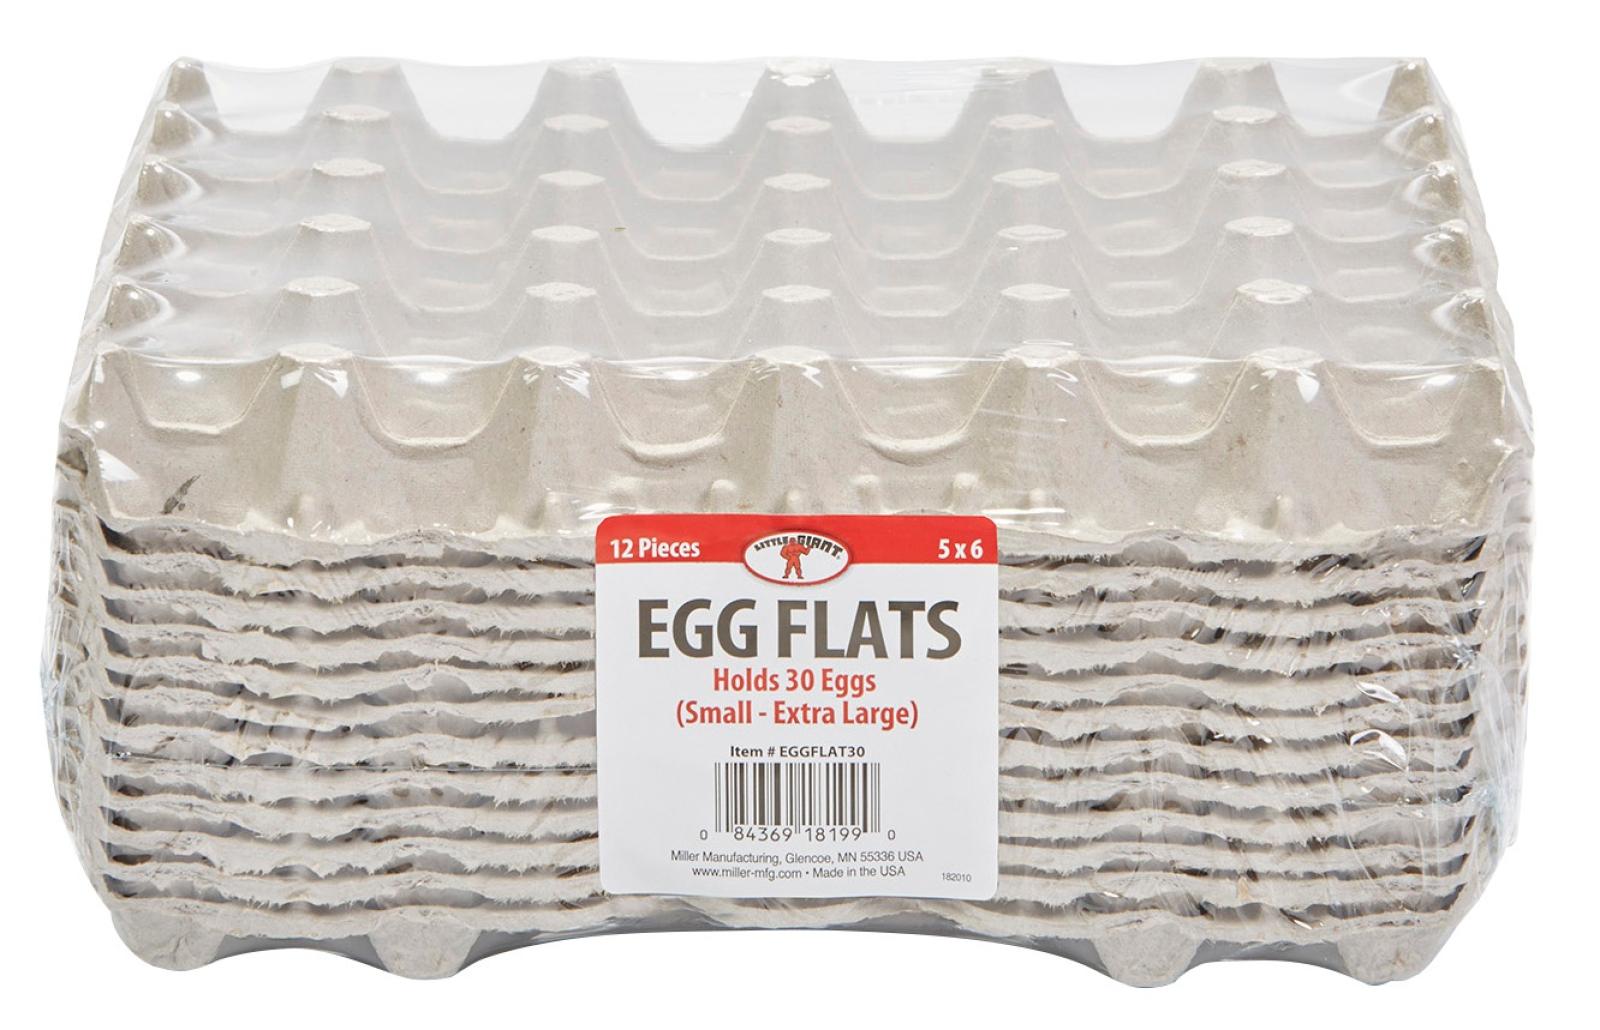 Little Giant Egg Flats 30 Count 5 x 6 Package of 12